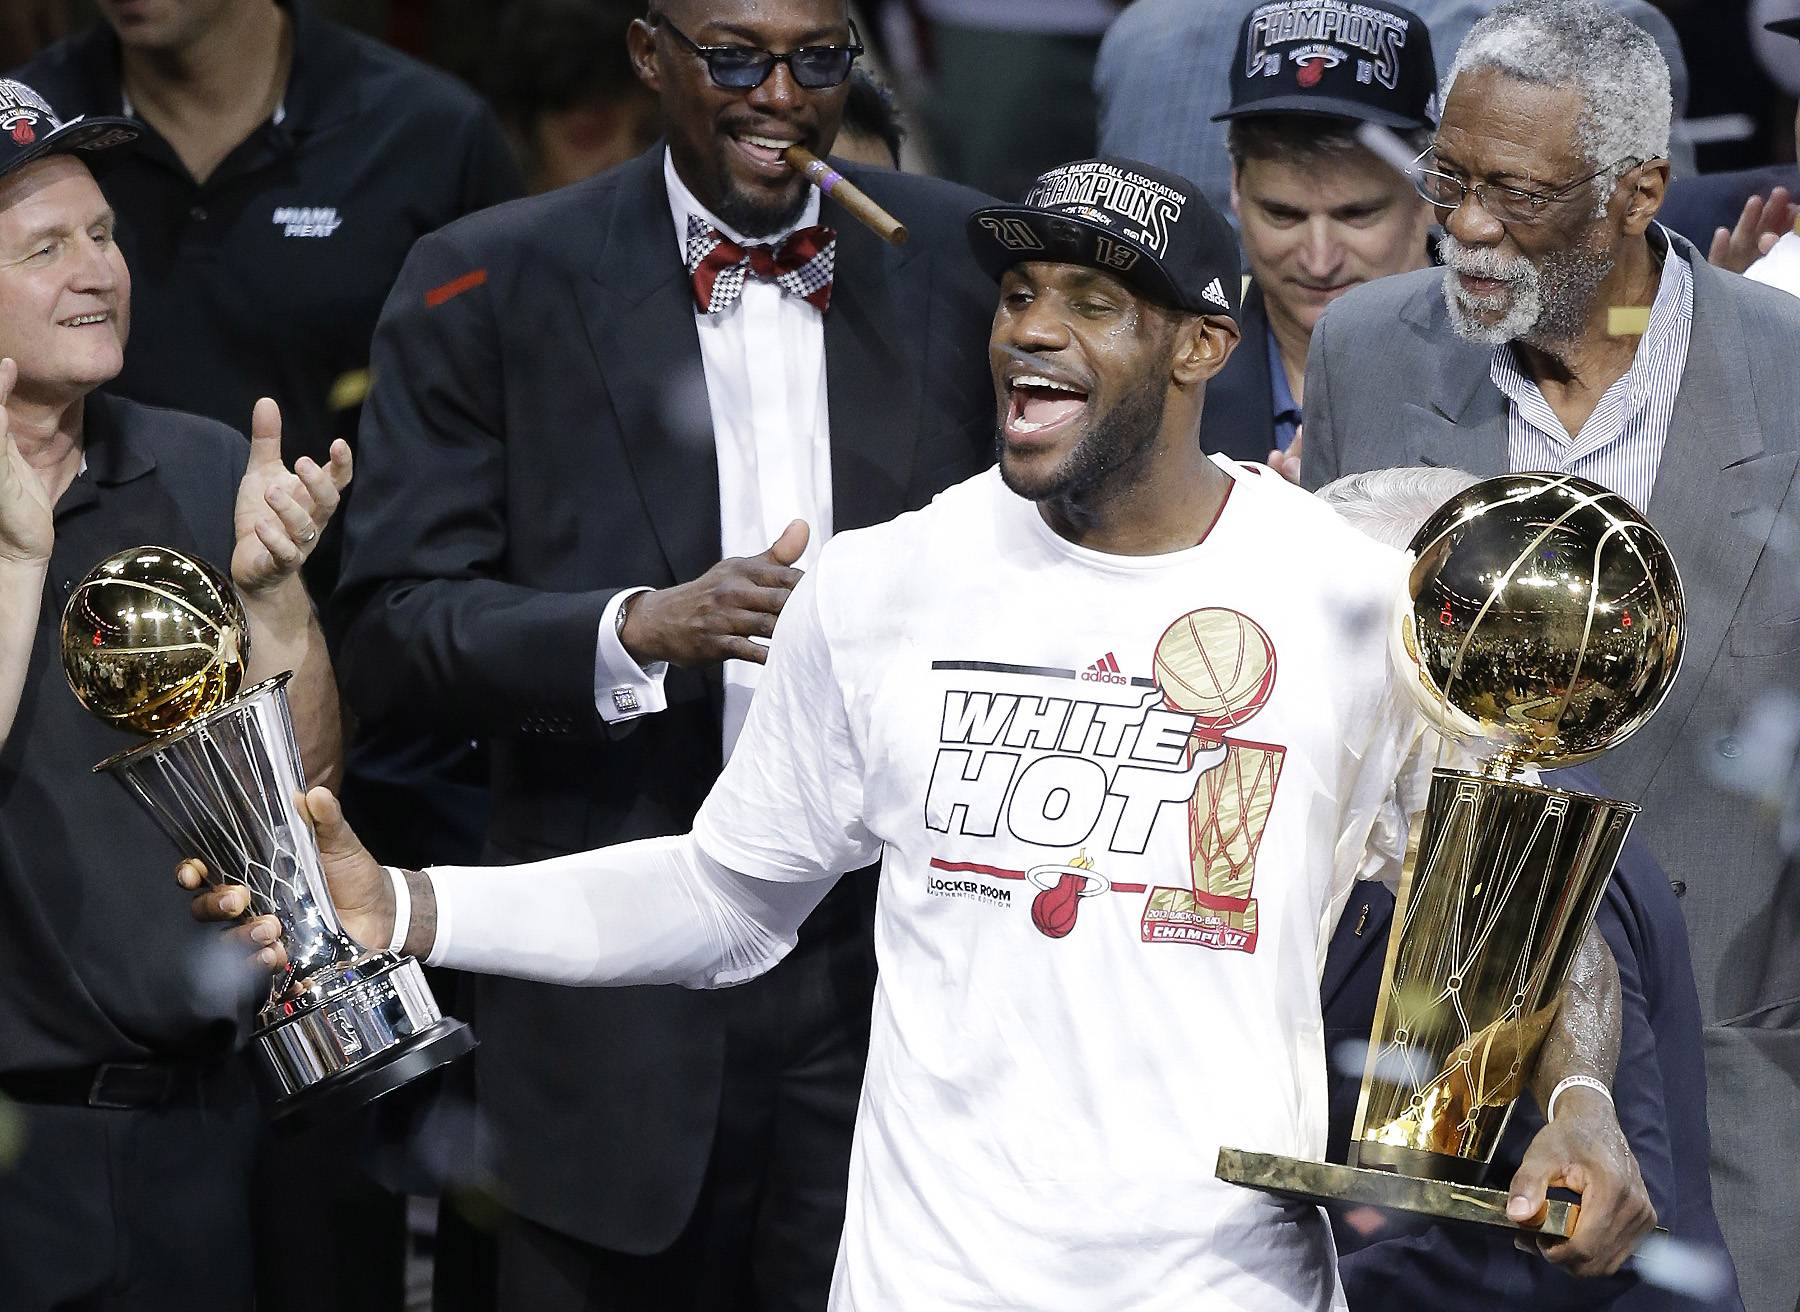 LeBron James on winning a second NBA title with the Miami Heat: - “The vision I had when I decided to come here is beginning to come true. To win back-to-back championships is an unbelievable feeling. This is what it’s all about.”(Photo by Ronald Martinez/Getty Images)